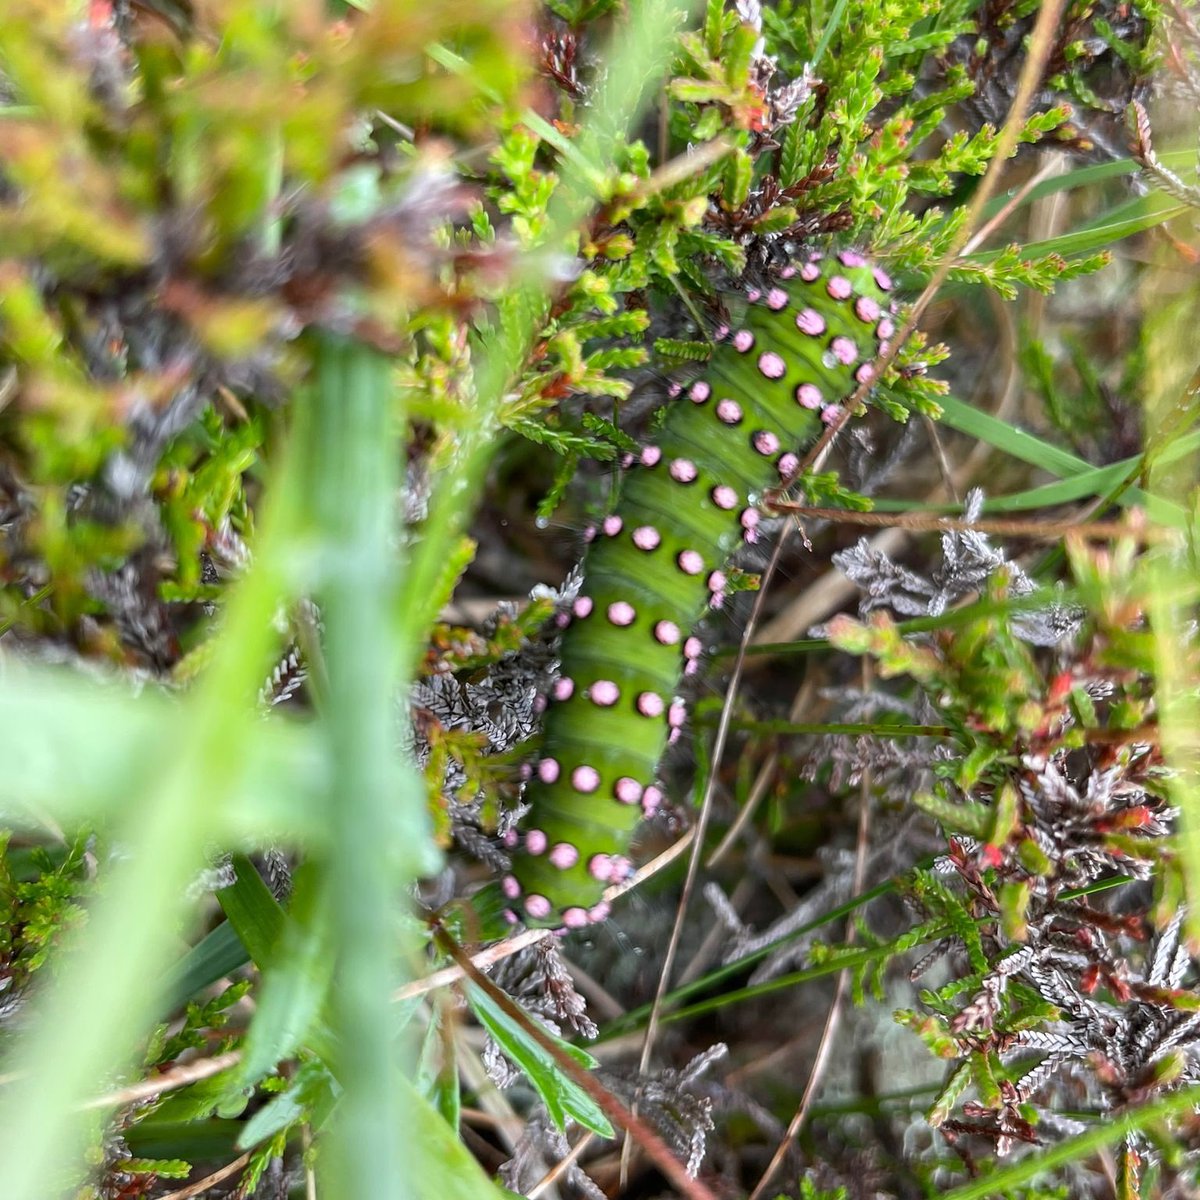 #MothMonday could be the new #SphagnumMonday ! 

We saw this lovely #EmporerMoth caterpillar today out on the #Scottish #peatlands on the #IsleOfLewis 

So much #beautiful #wildlife on the #hebrides 

#Scotland